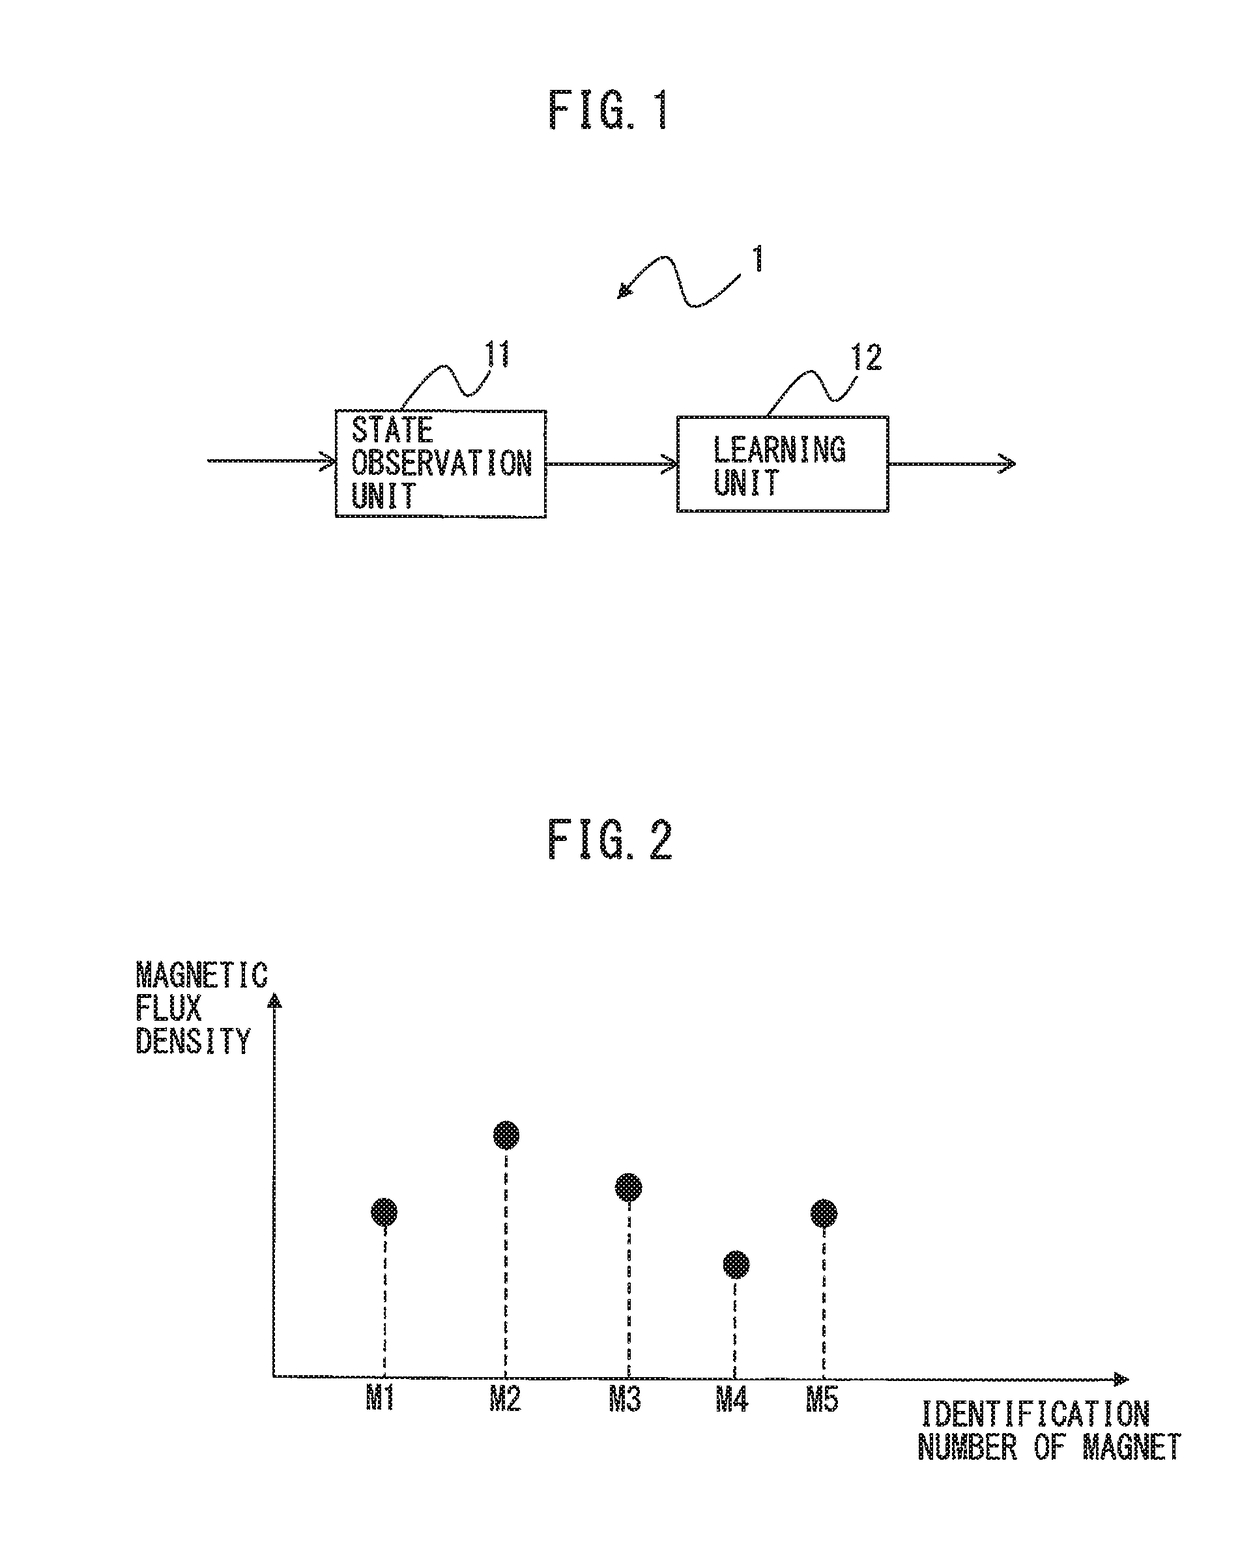 Machine learning apparatus and method for learning arrangement position of magnet in rotor and rotor design apparatus including machine learning apparatus